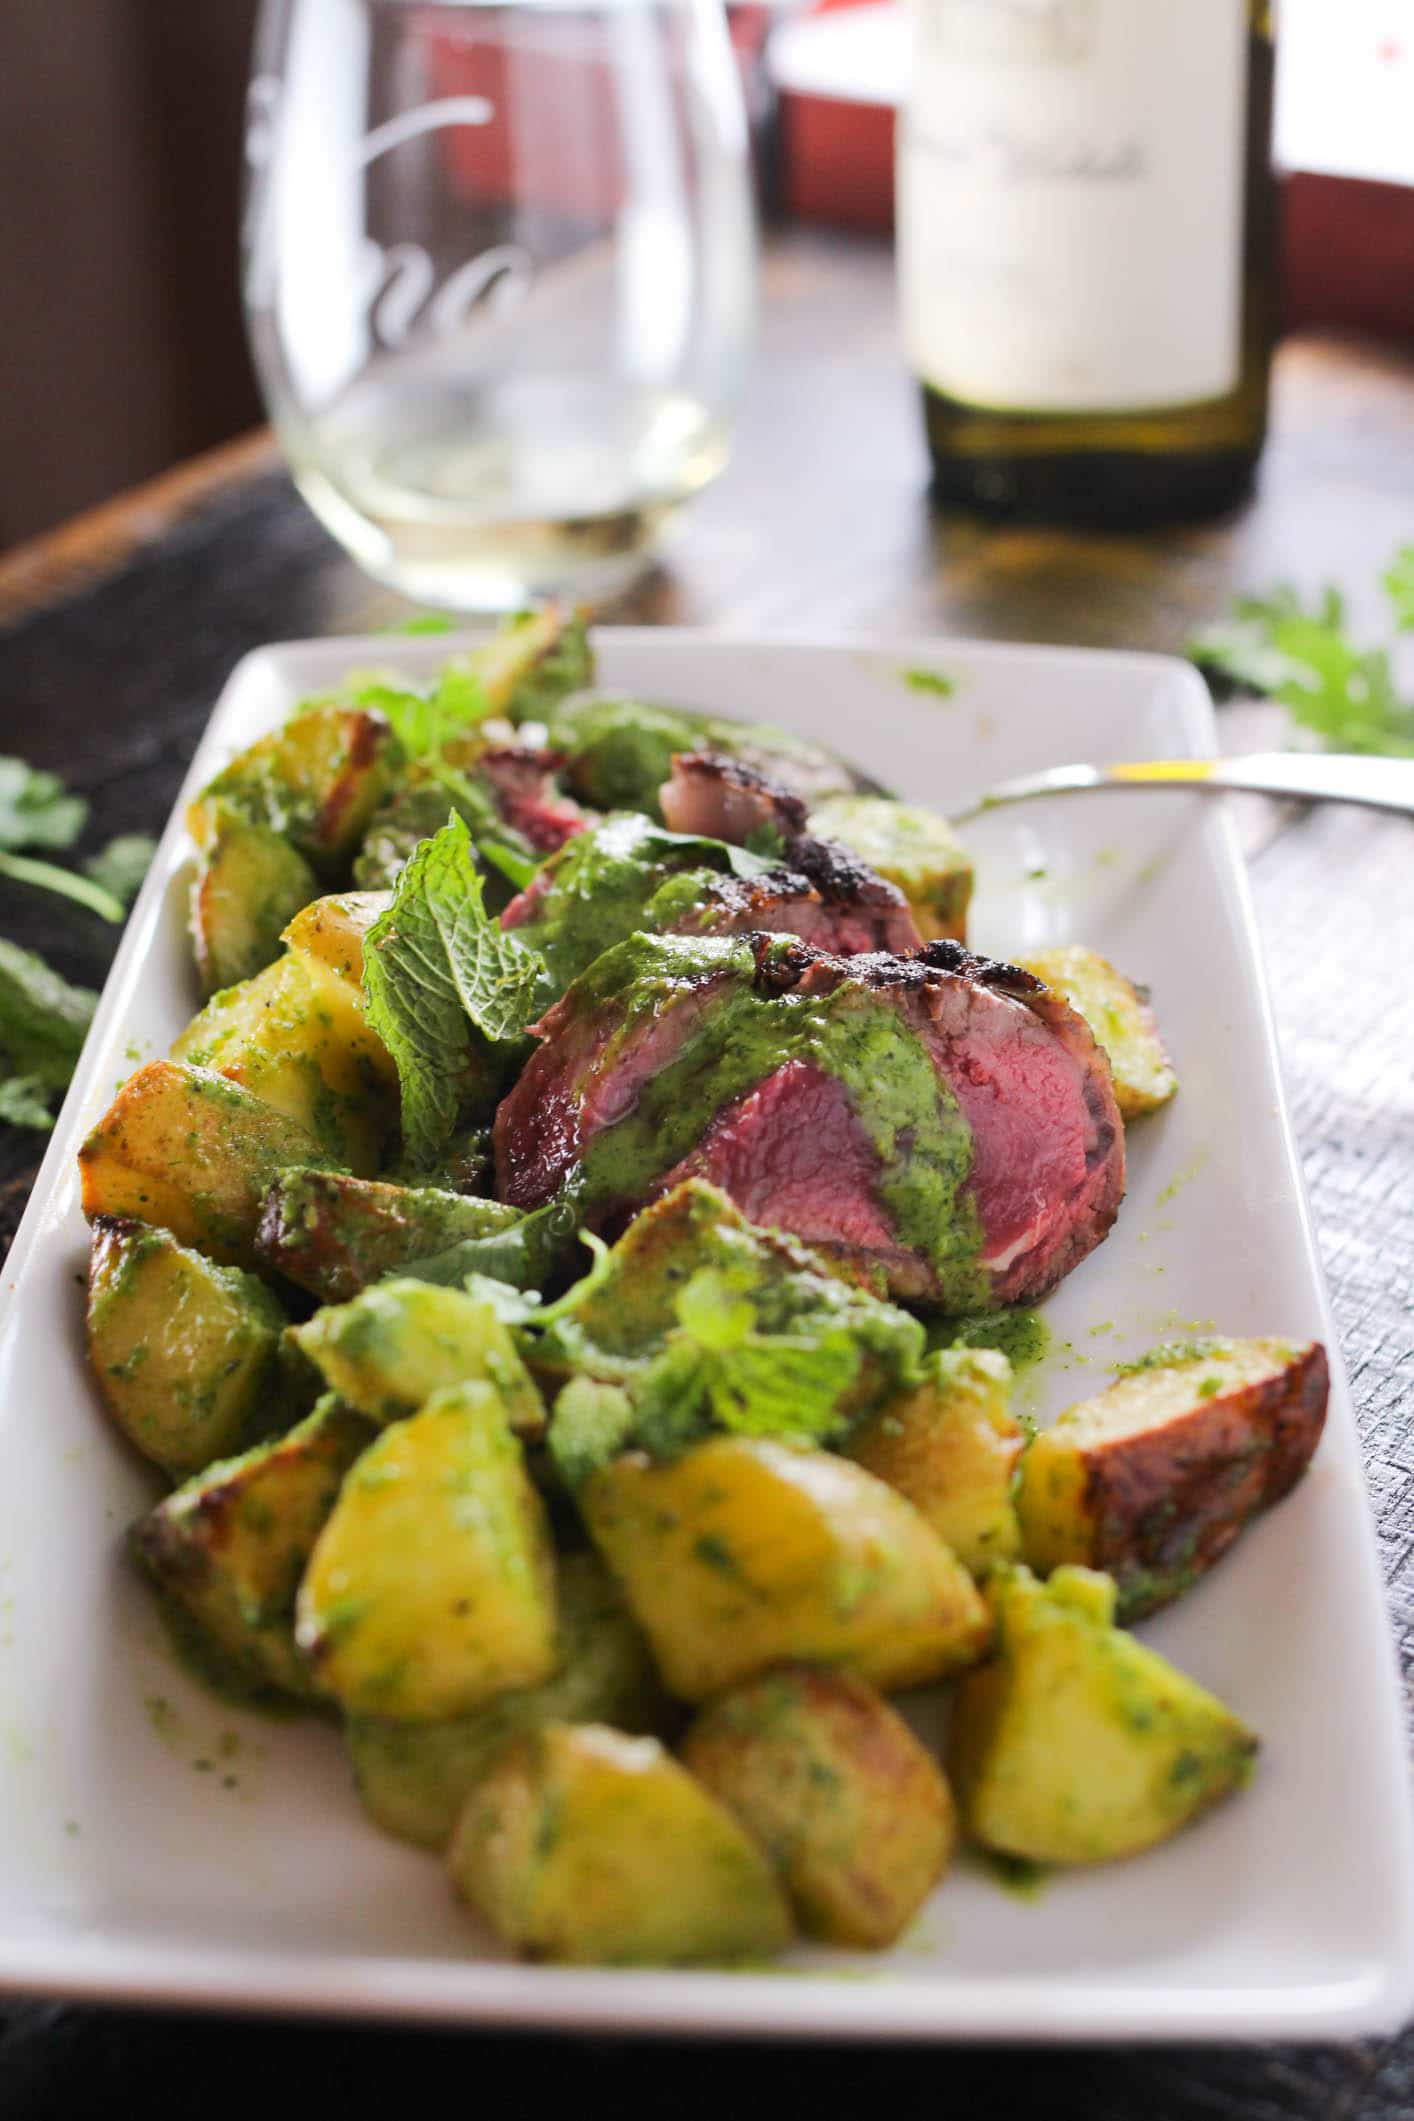 A simple and elegant one pan roasted lamb and potato recipe cooked to perfection and drizzled with an herb infused chimichurri.A simple and elegant one pan roasted lamb and potato recipe cooked to perfection and drizzled with an herb infused chimichurri.A simple and elegant one pan roasted lamb and potato recipe cooked to perfection and drizzled with an herb infused chimichurri.A simple and elegant one pan roasted lamb and potato recipe cooked to perfection and drizzled with an herb infused chimichurri.